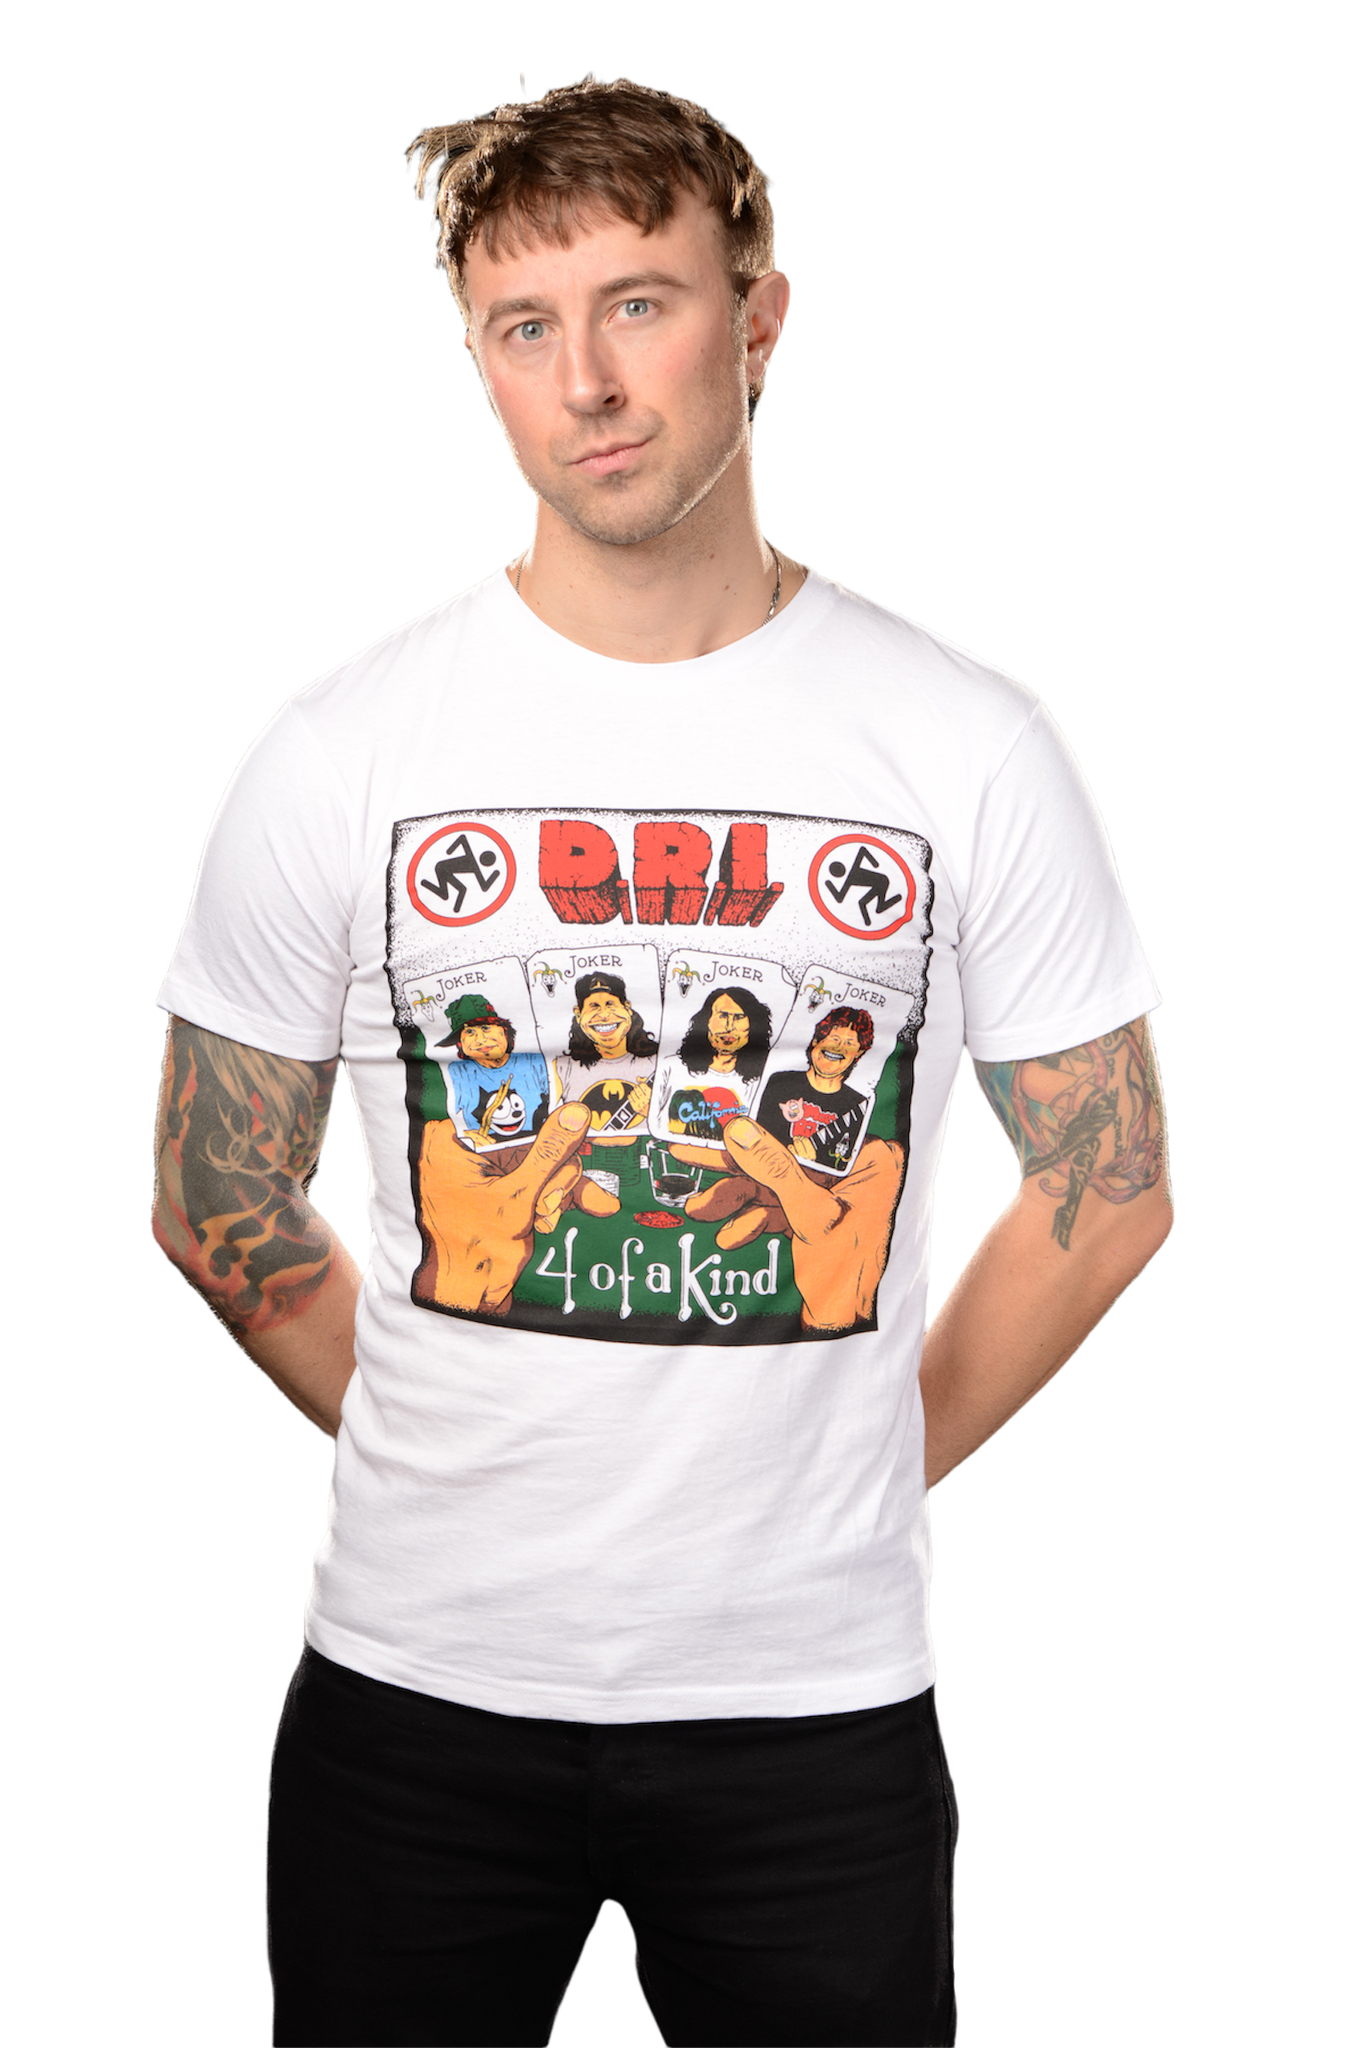 D.R.I.: "FOUR OF A KIND" WHITE T-SHIRT